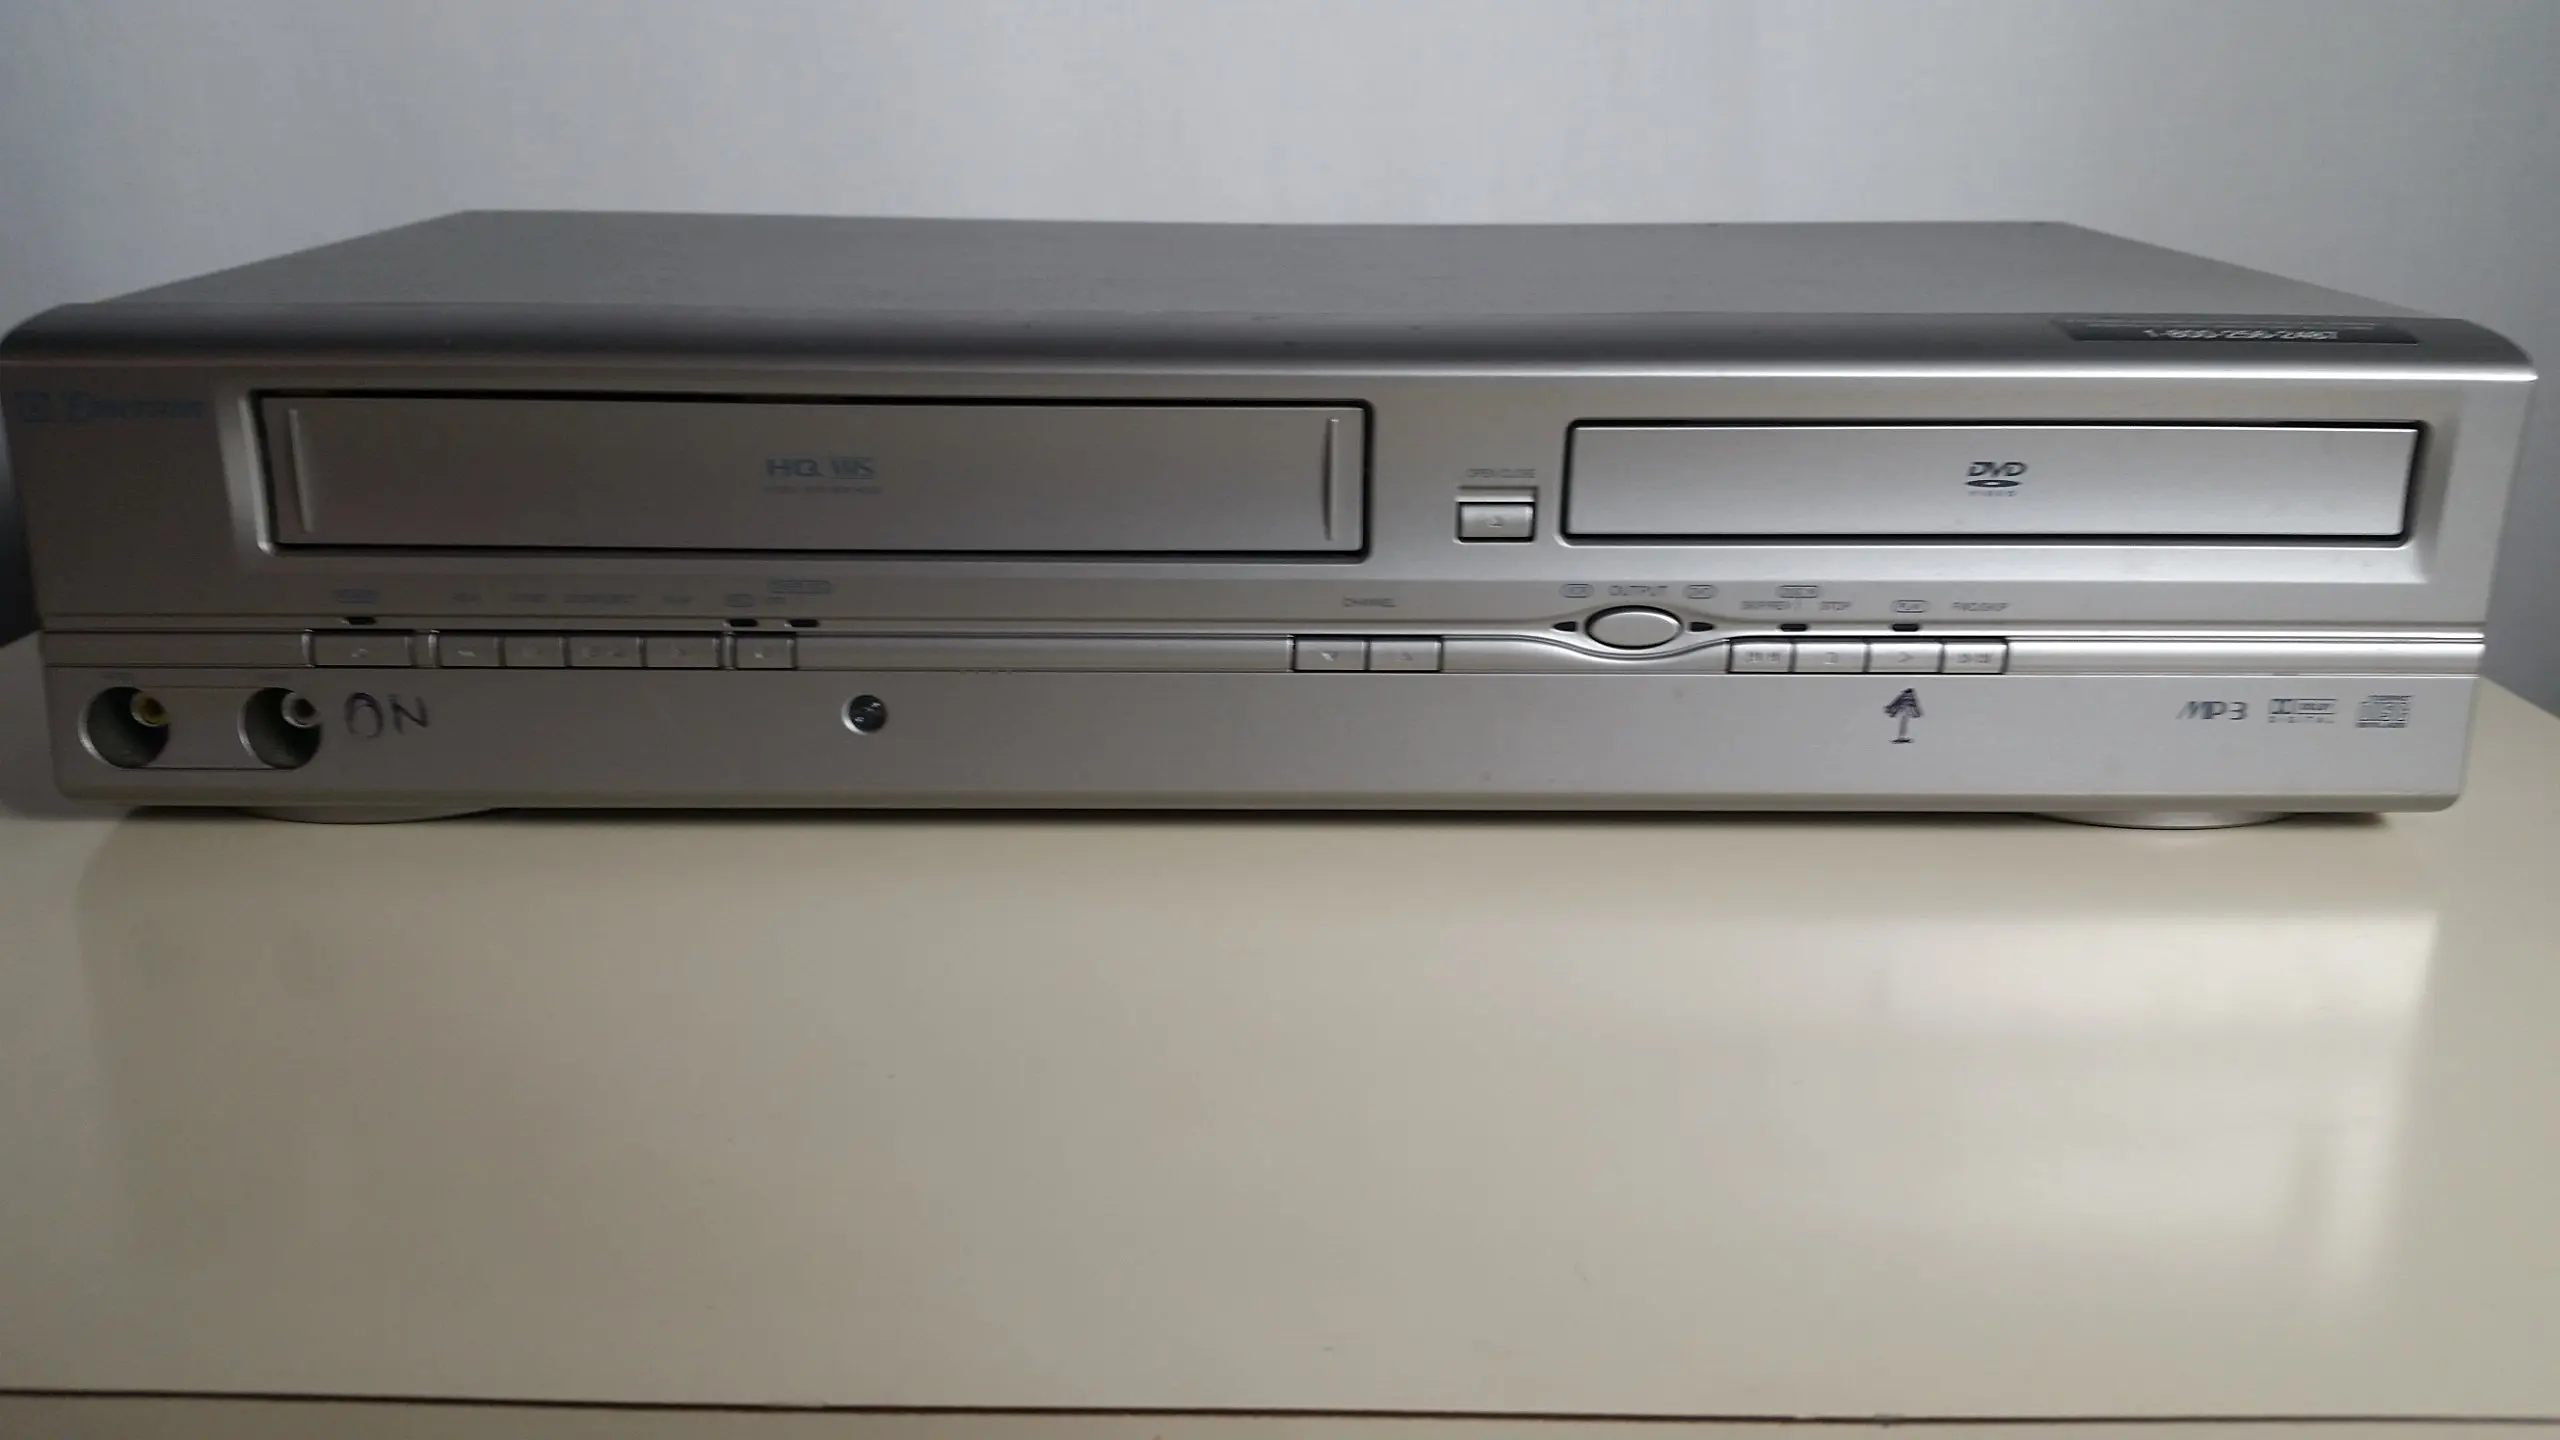 Buy Emerson Ewd24 Dvd Vcr Combo Player With Tv Tuner In Cheap Price On Alibaba Com